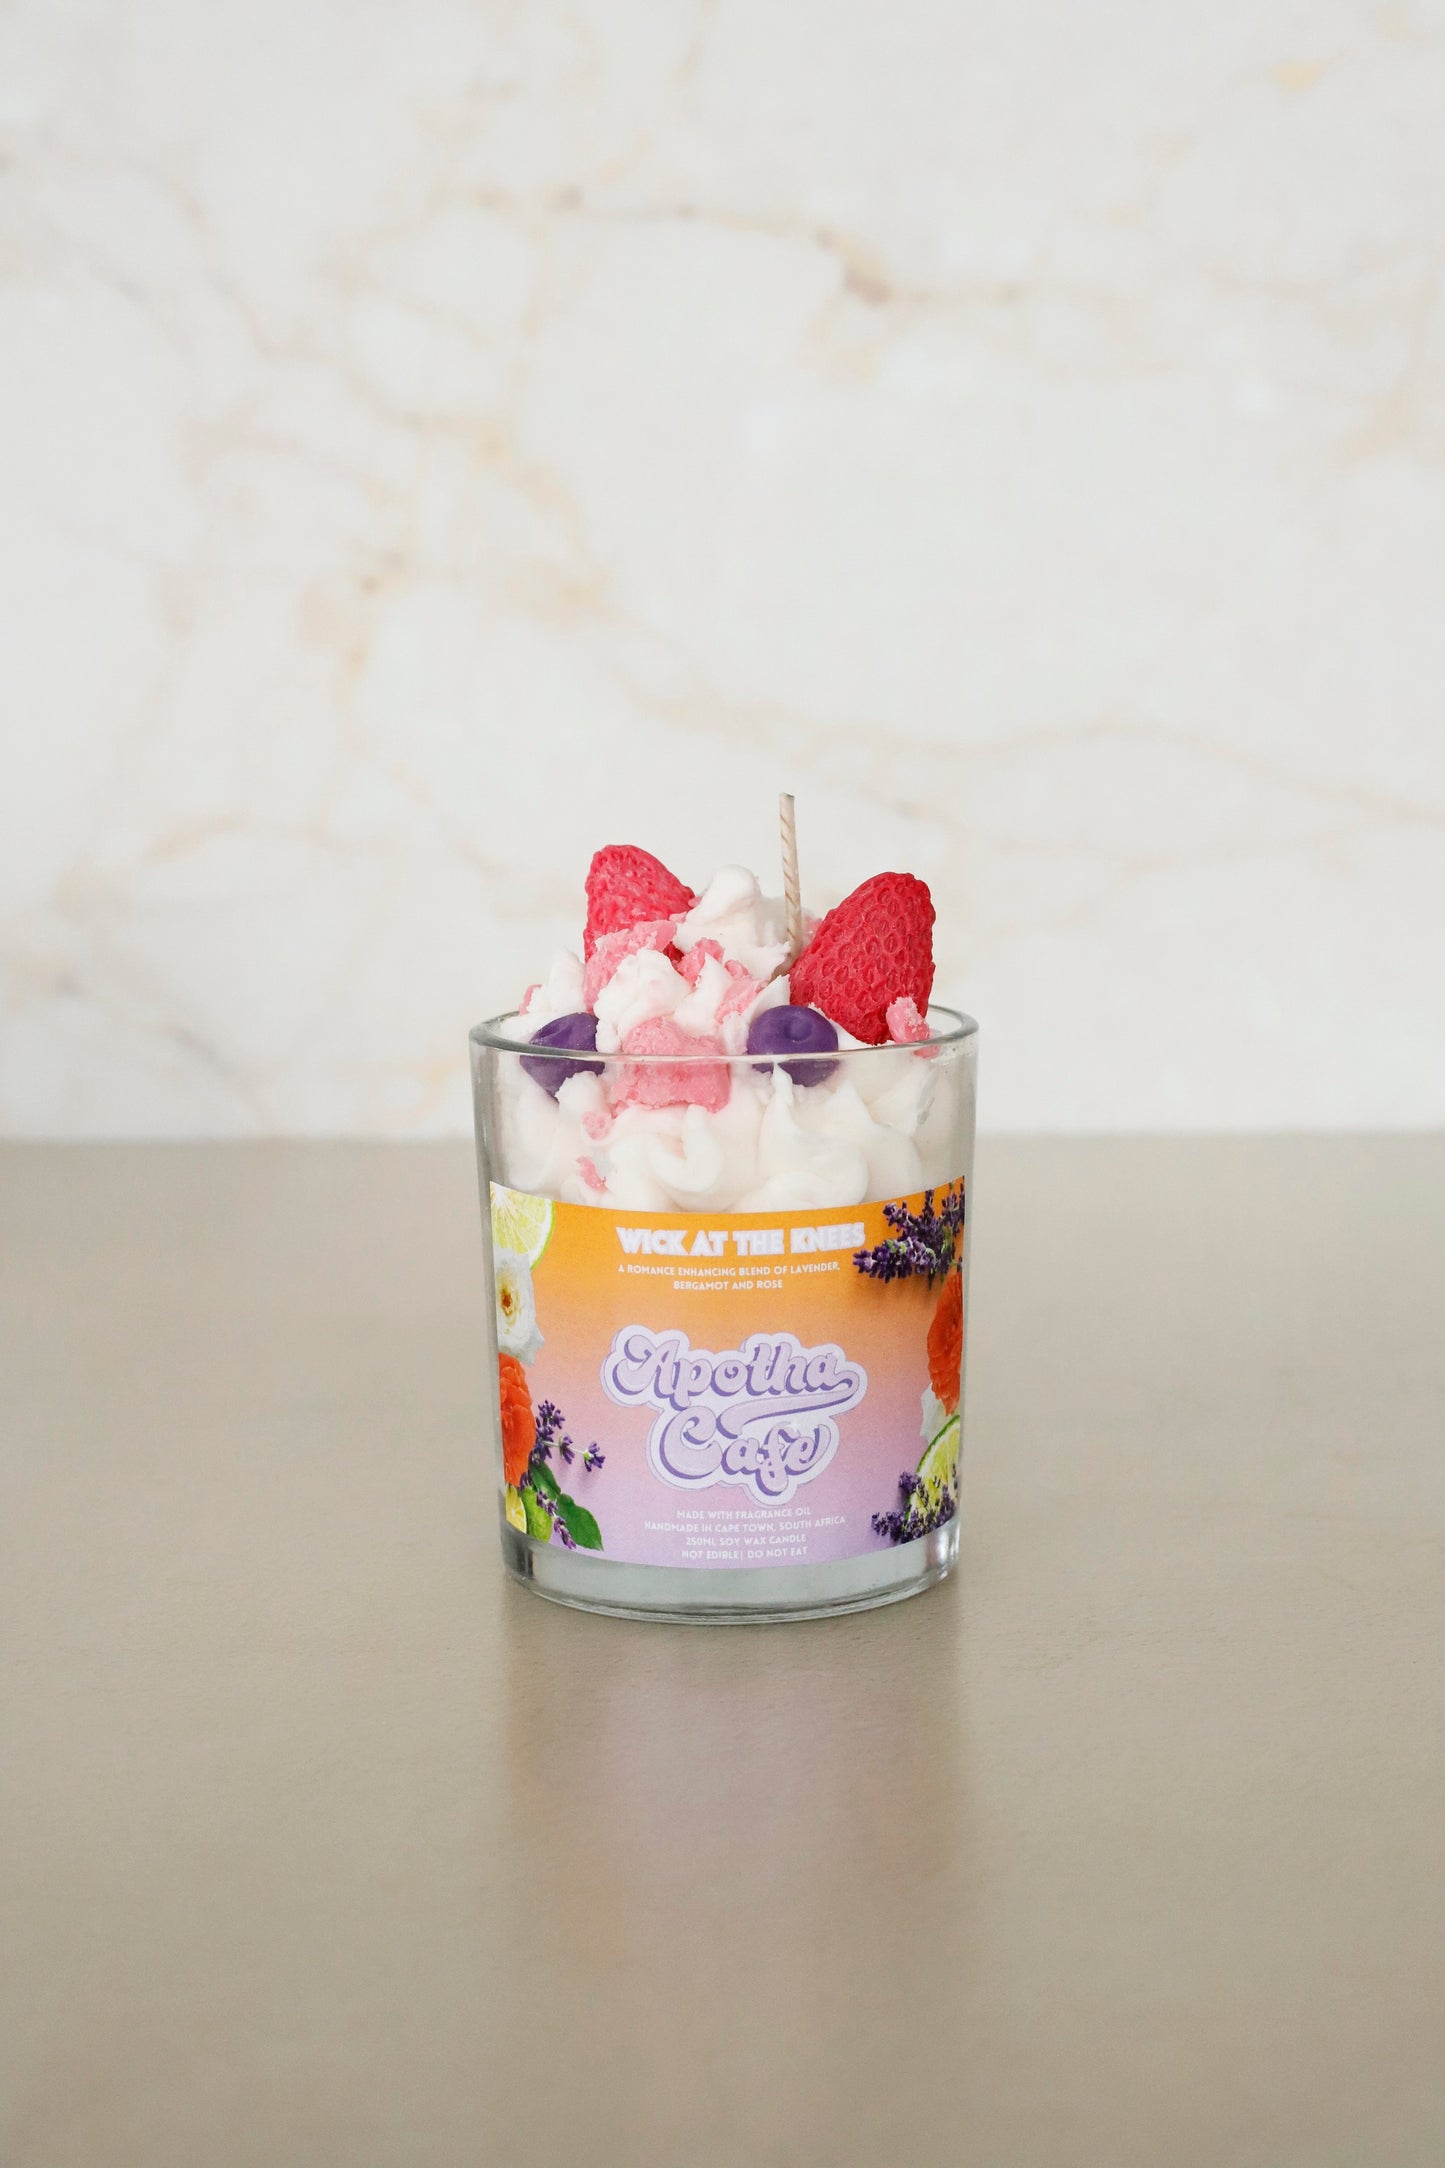 Wick at the Knees Soy Candle